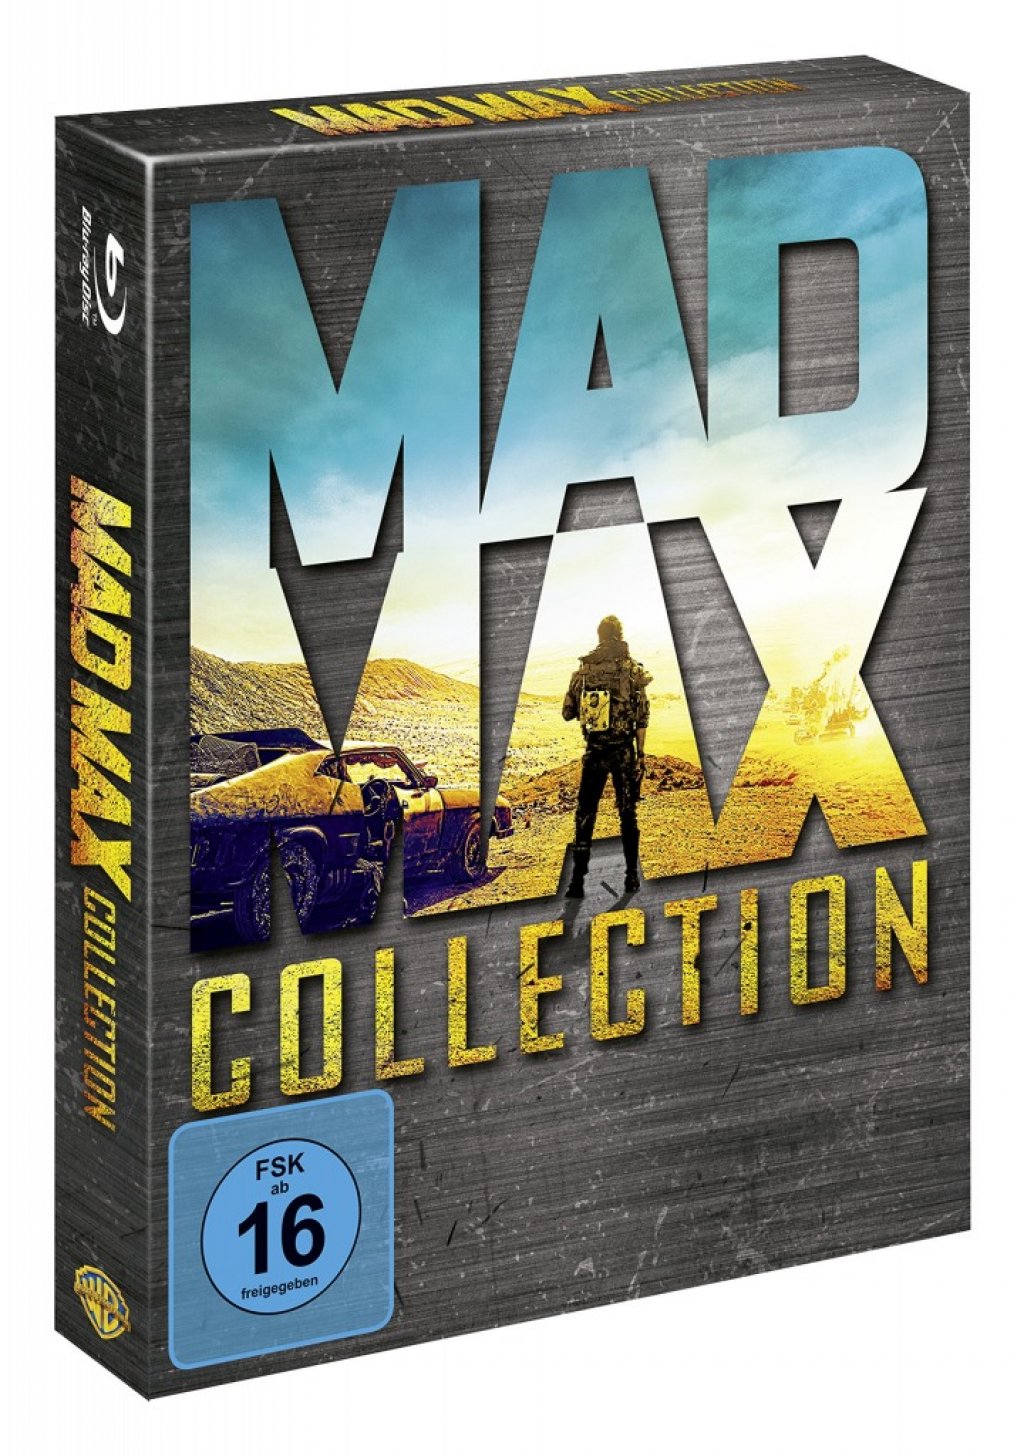 Max collection. Безумный Макс DVD. Безумный Макс Постер. Диск Blu-ray Безумный Макс дорога ярости. Mad Max High Octane collection.